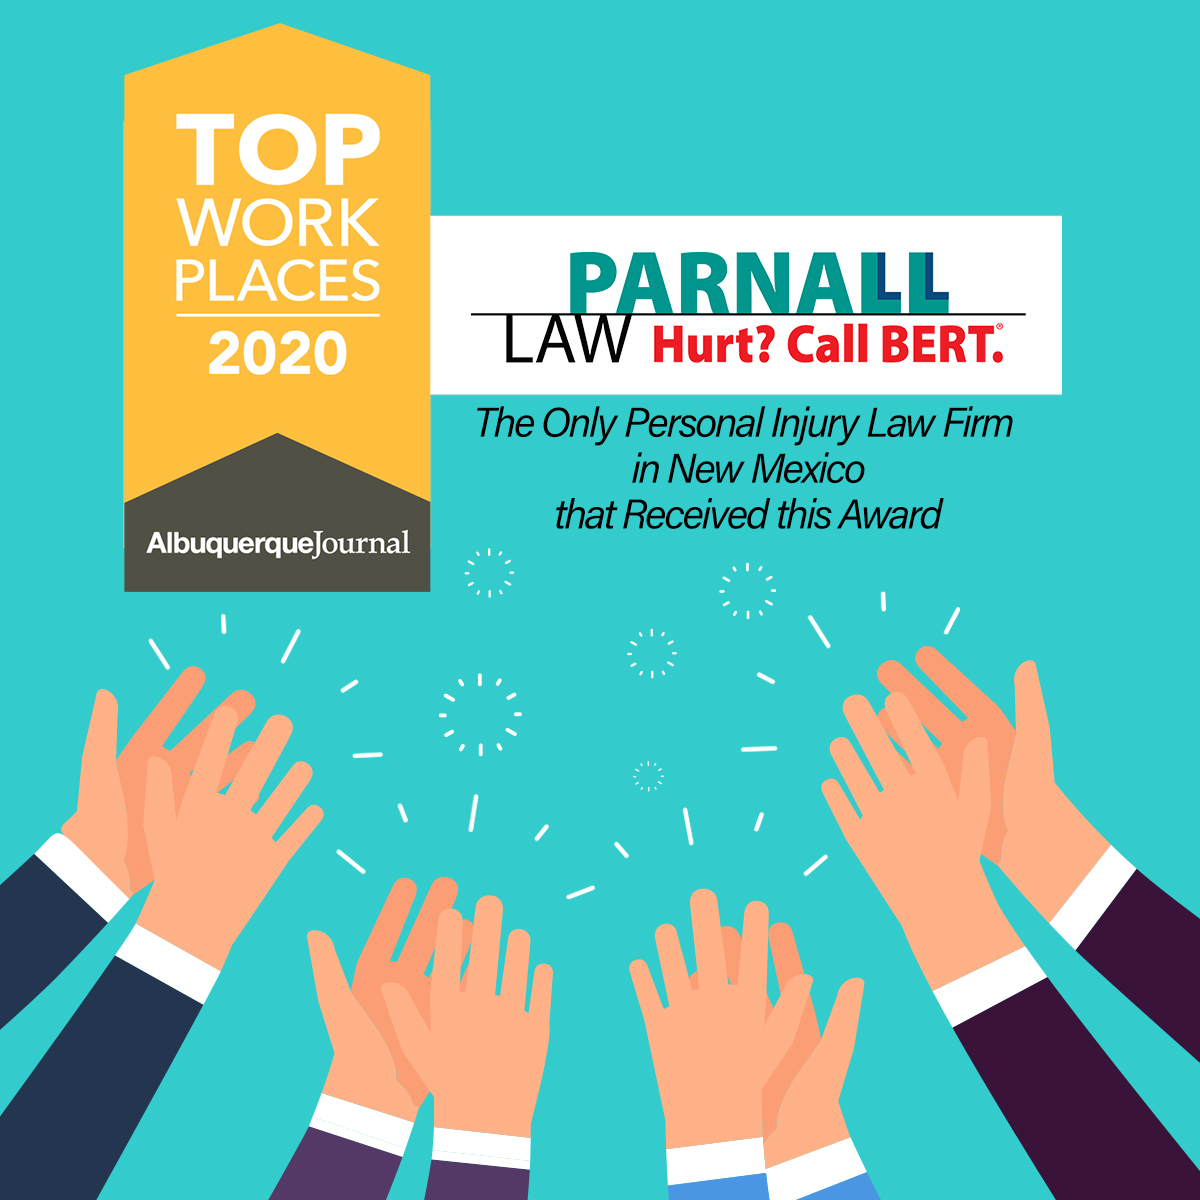 top workplaces 2020